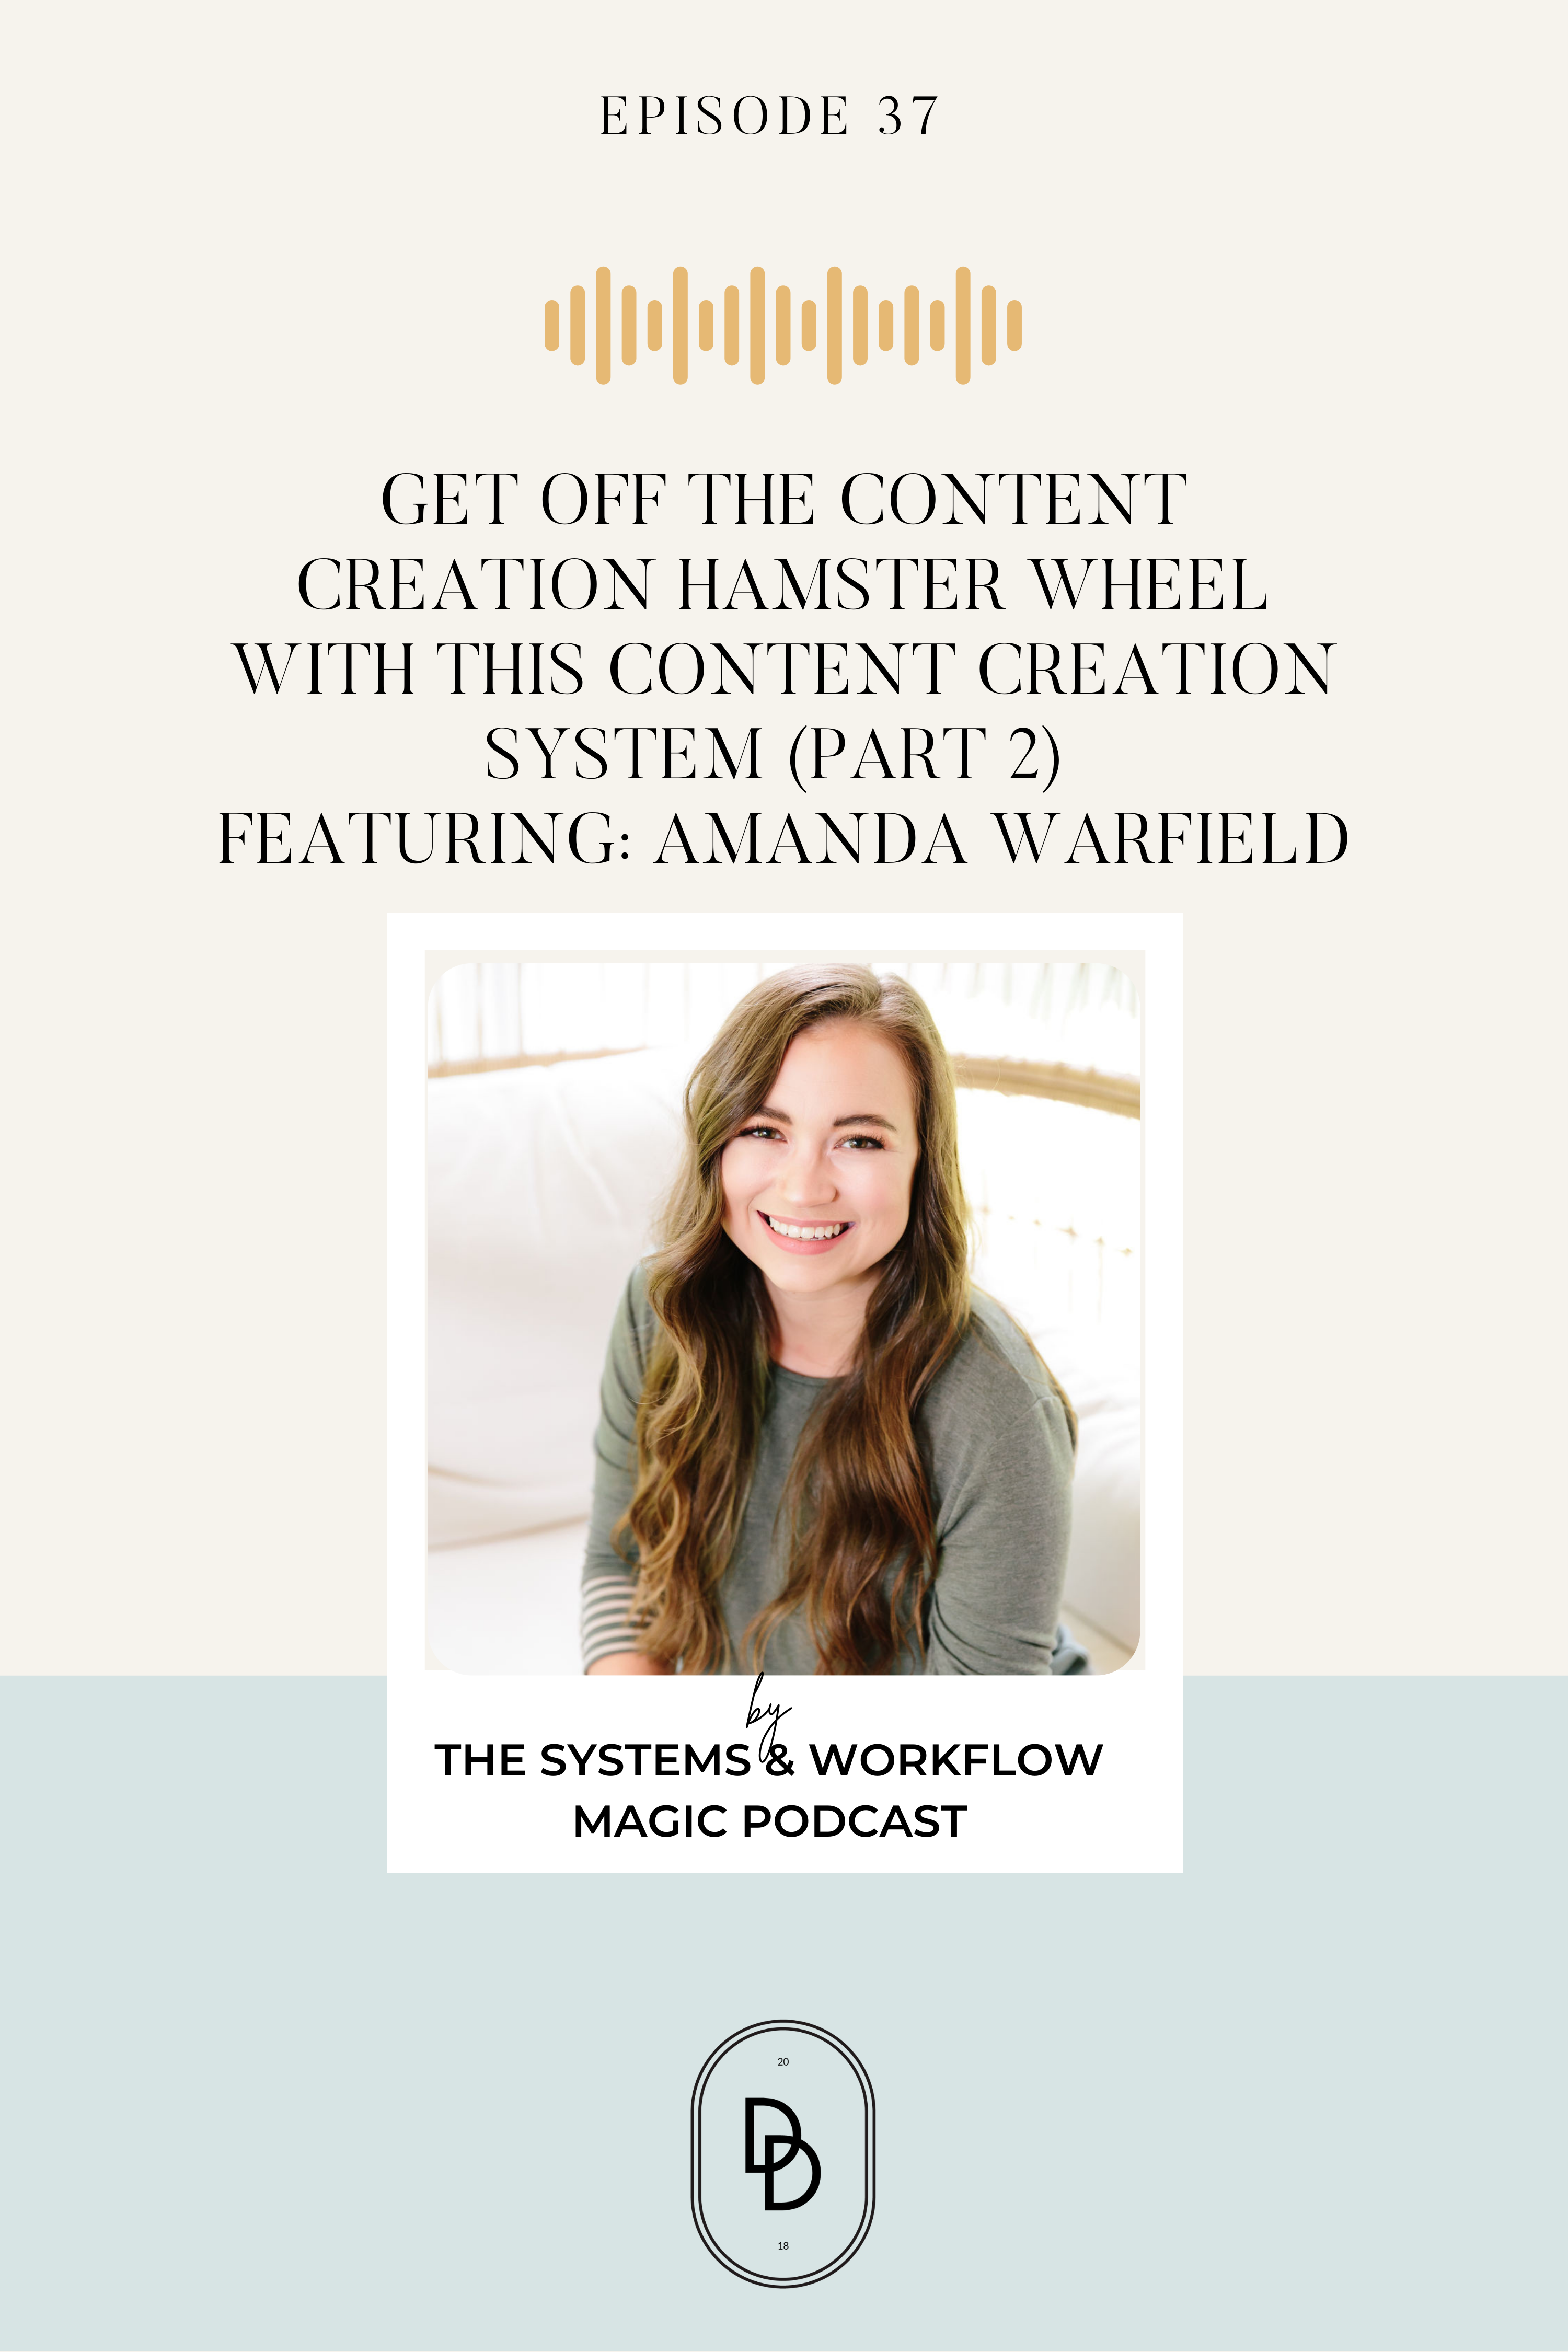 Episode 37 of the Systems and Workflow Magic Podcast Podcast with Dolly DeLong and Amanda Warfield